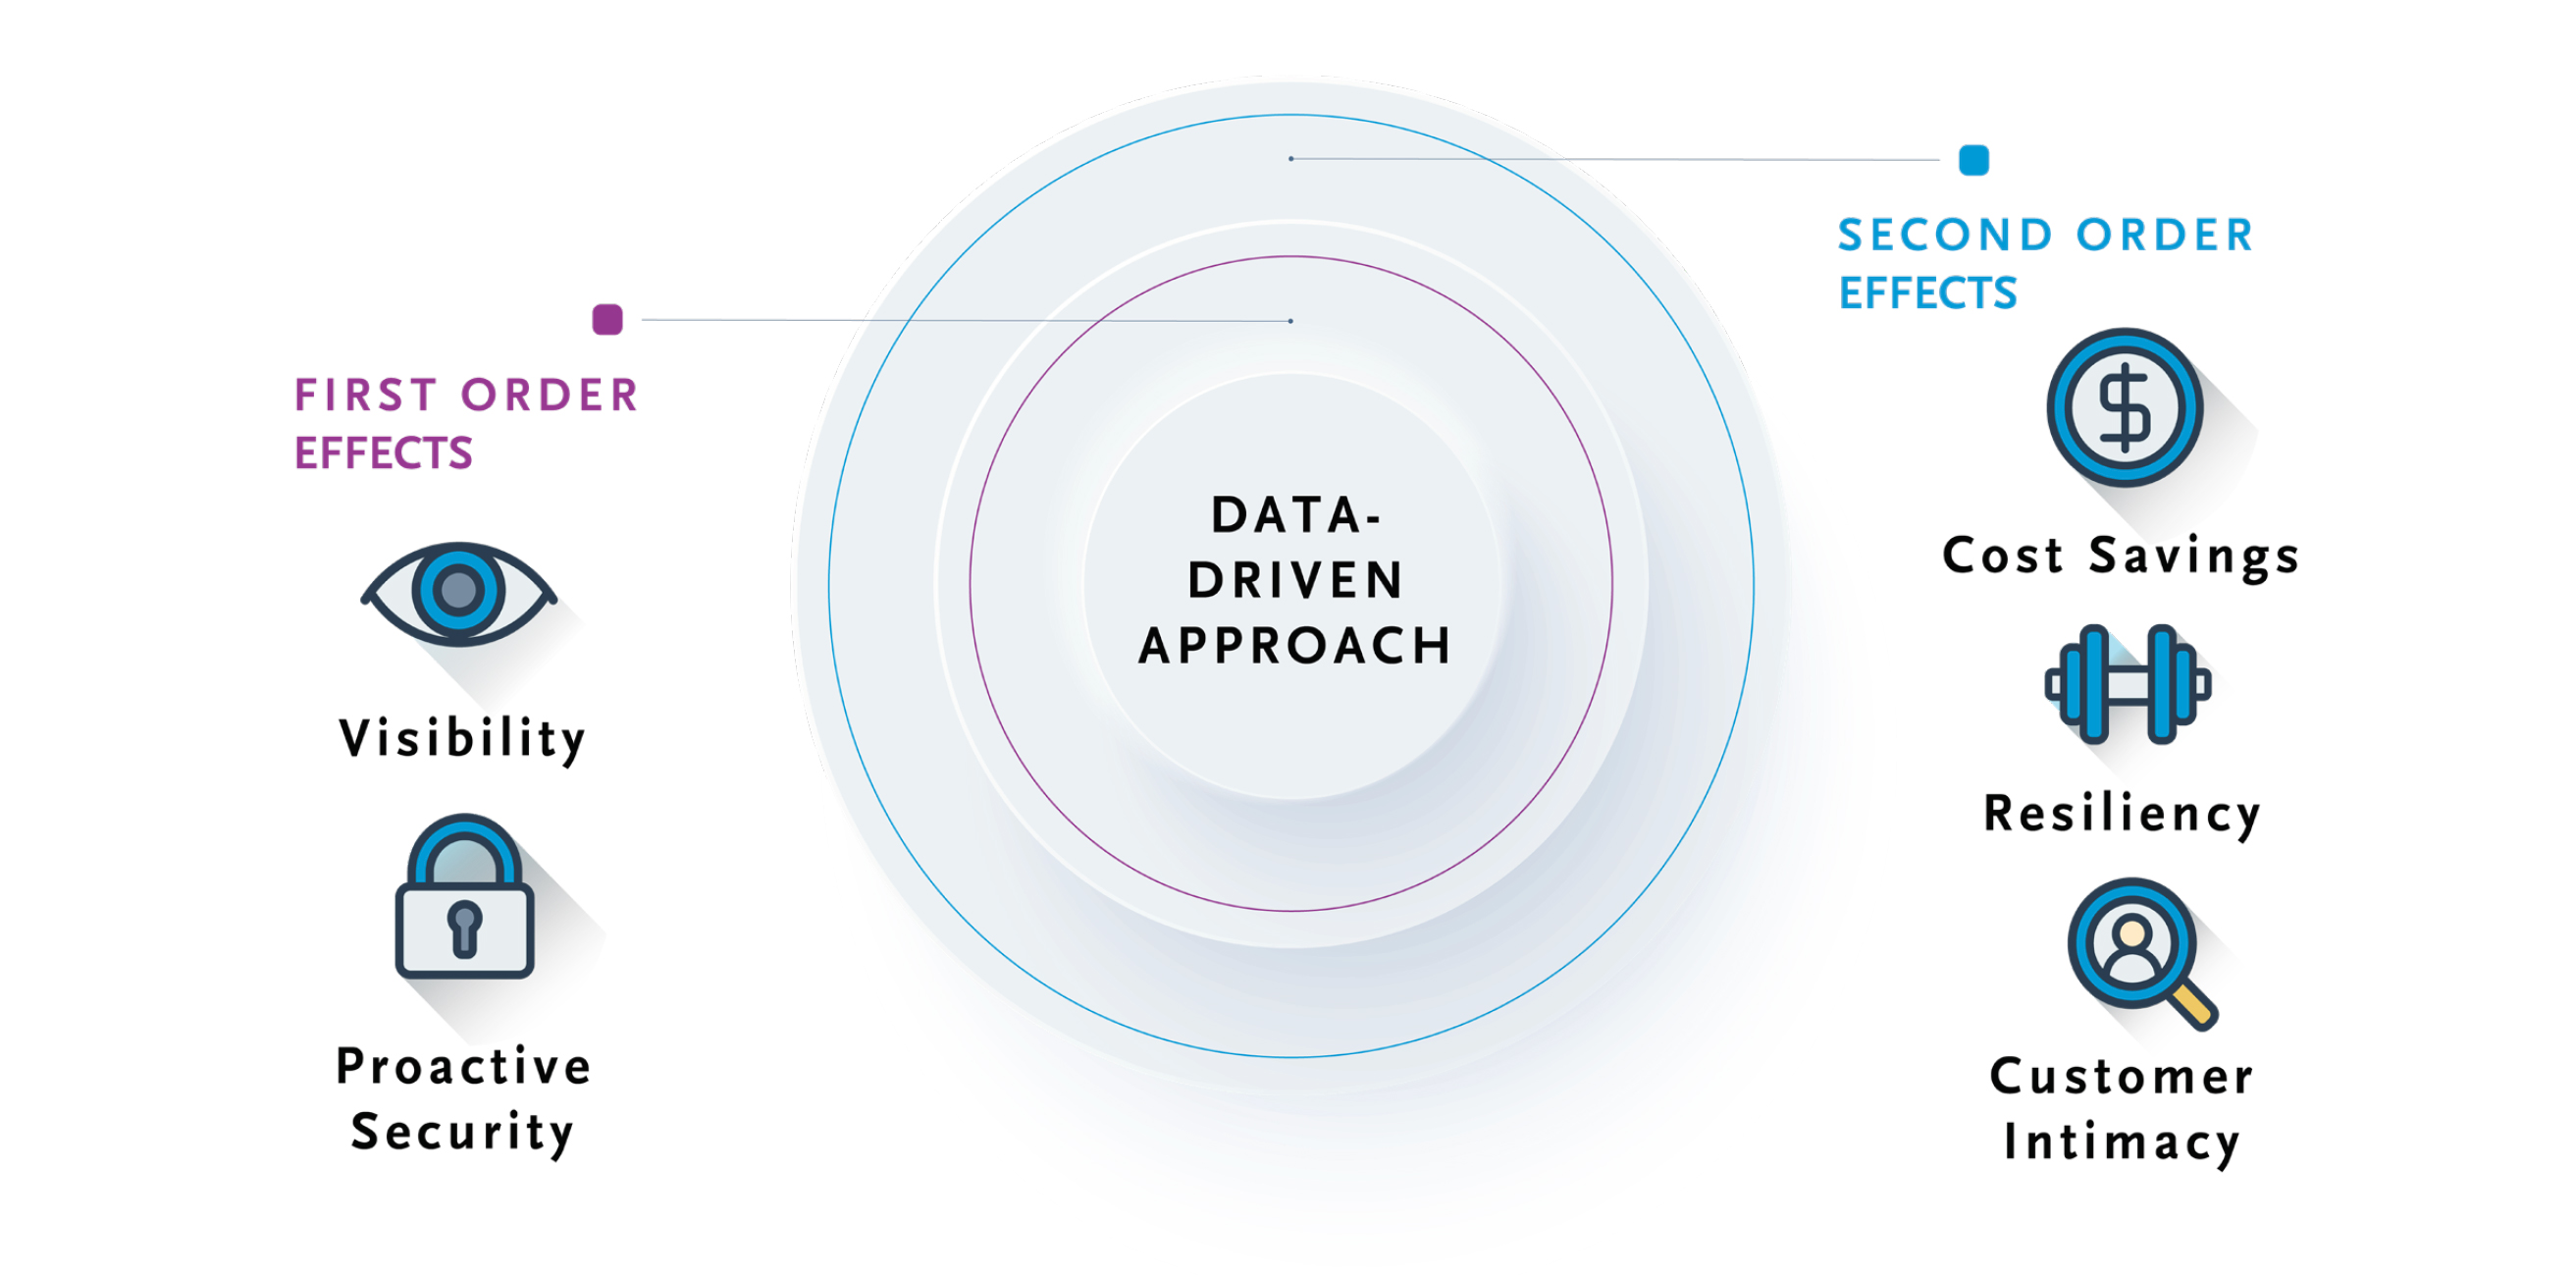 Data Drive Approach. First Order Effects: Visibility and Proactive Security. Second Order Effects: Cost Savings, Resiliency, and Customer Intimacy.